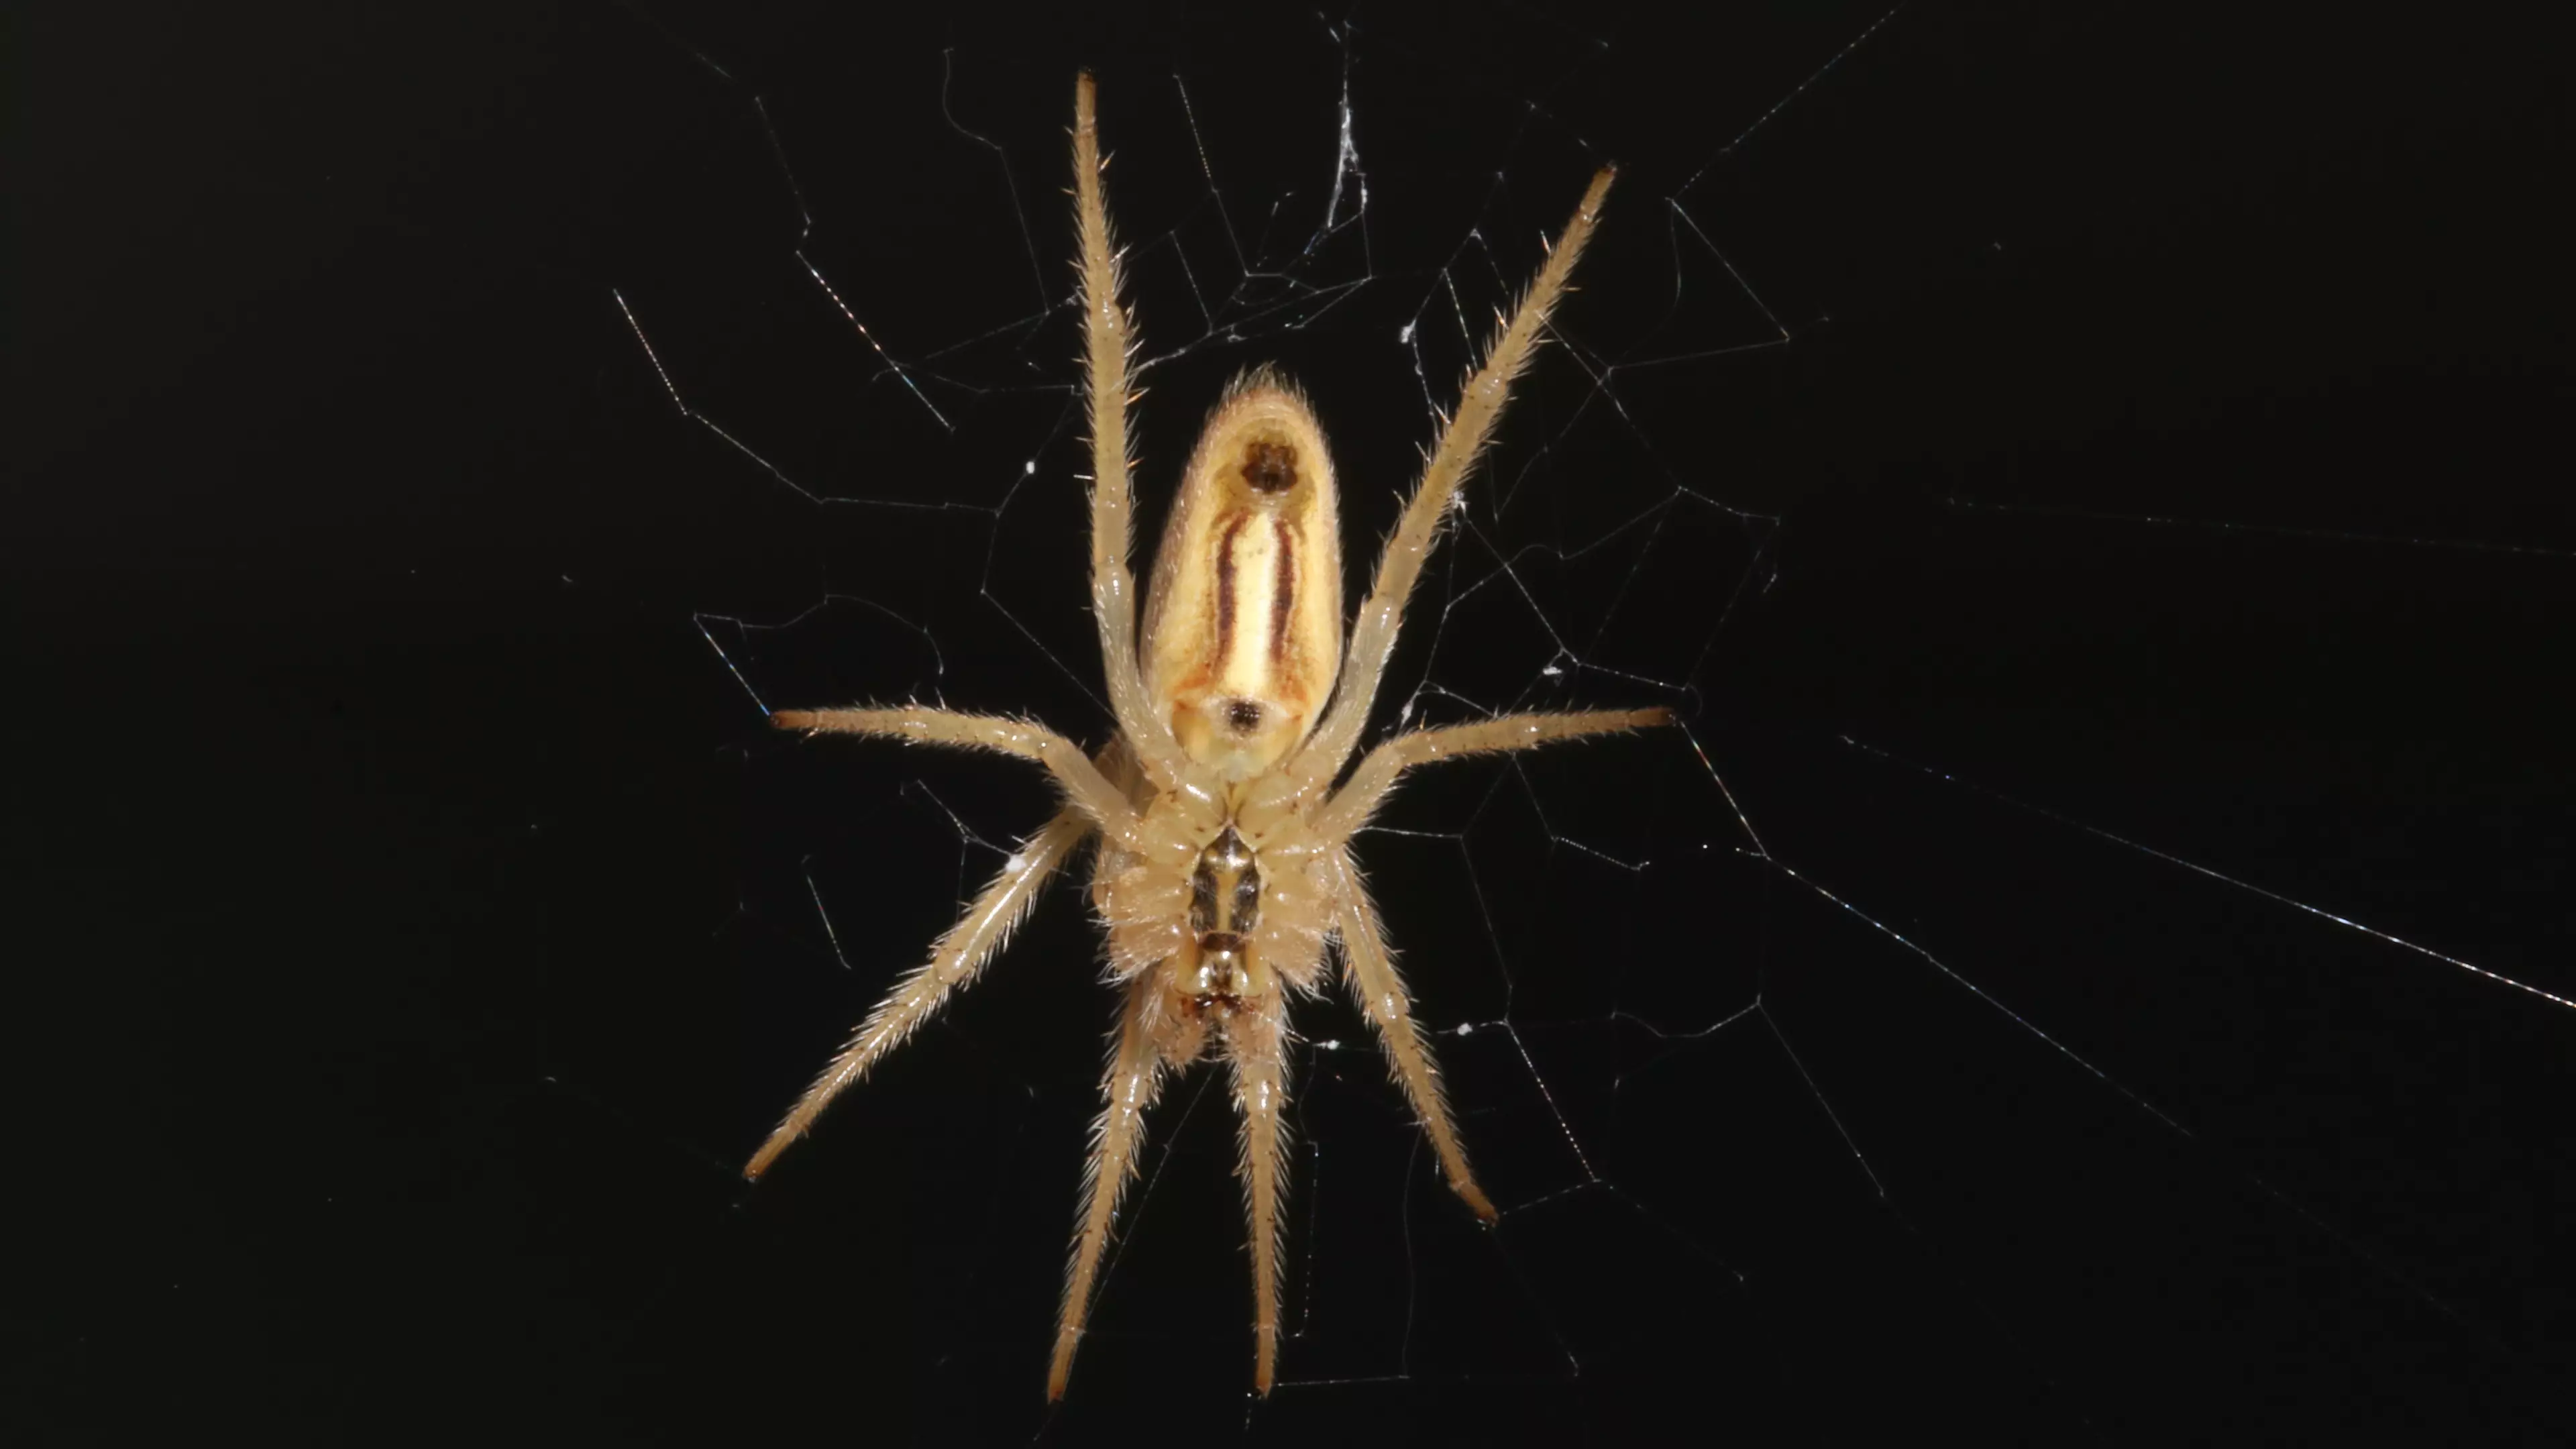 Spiders Could Eat Every Human On Earth In A Year